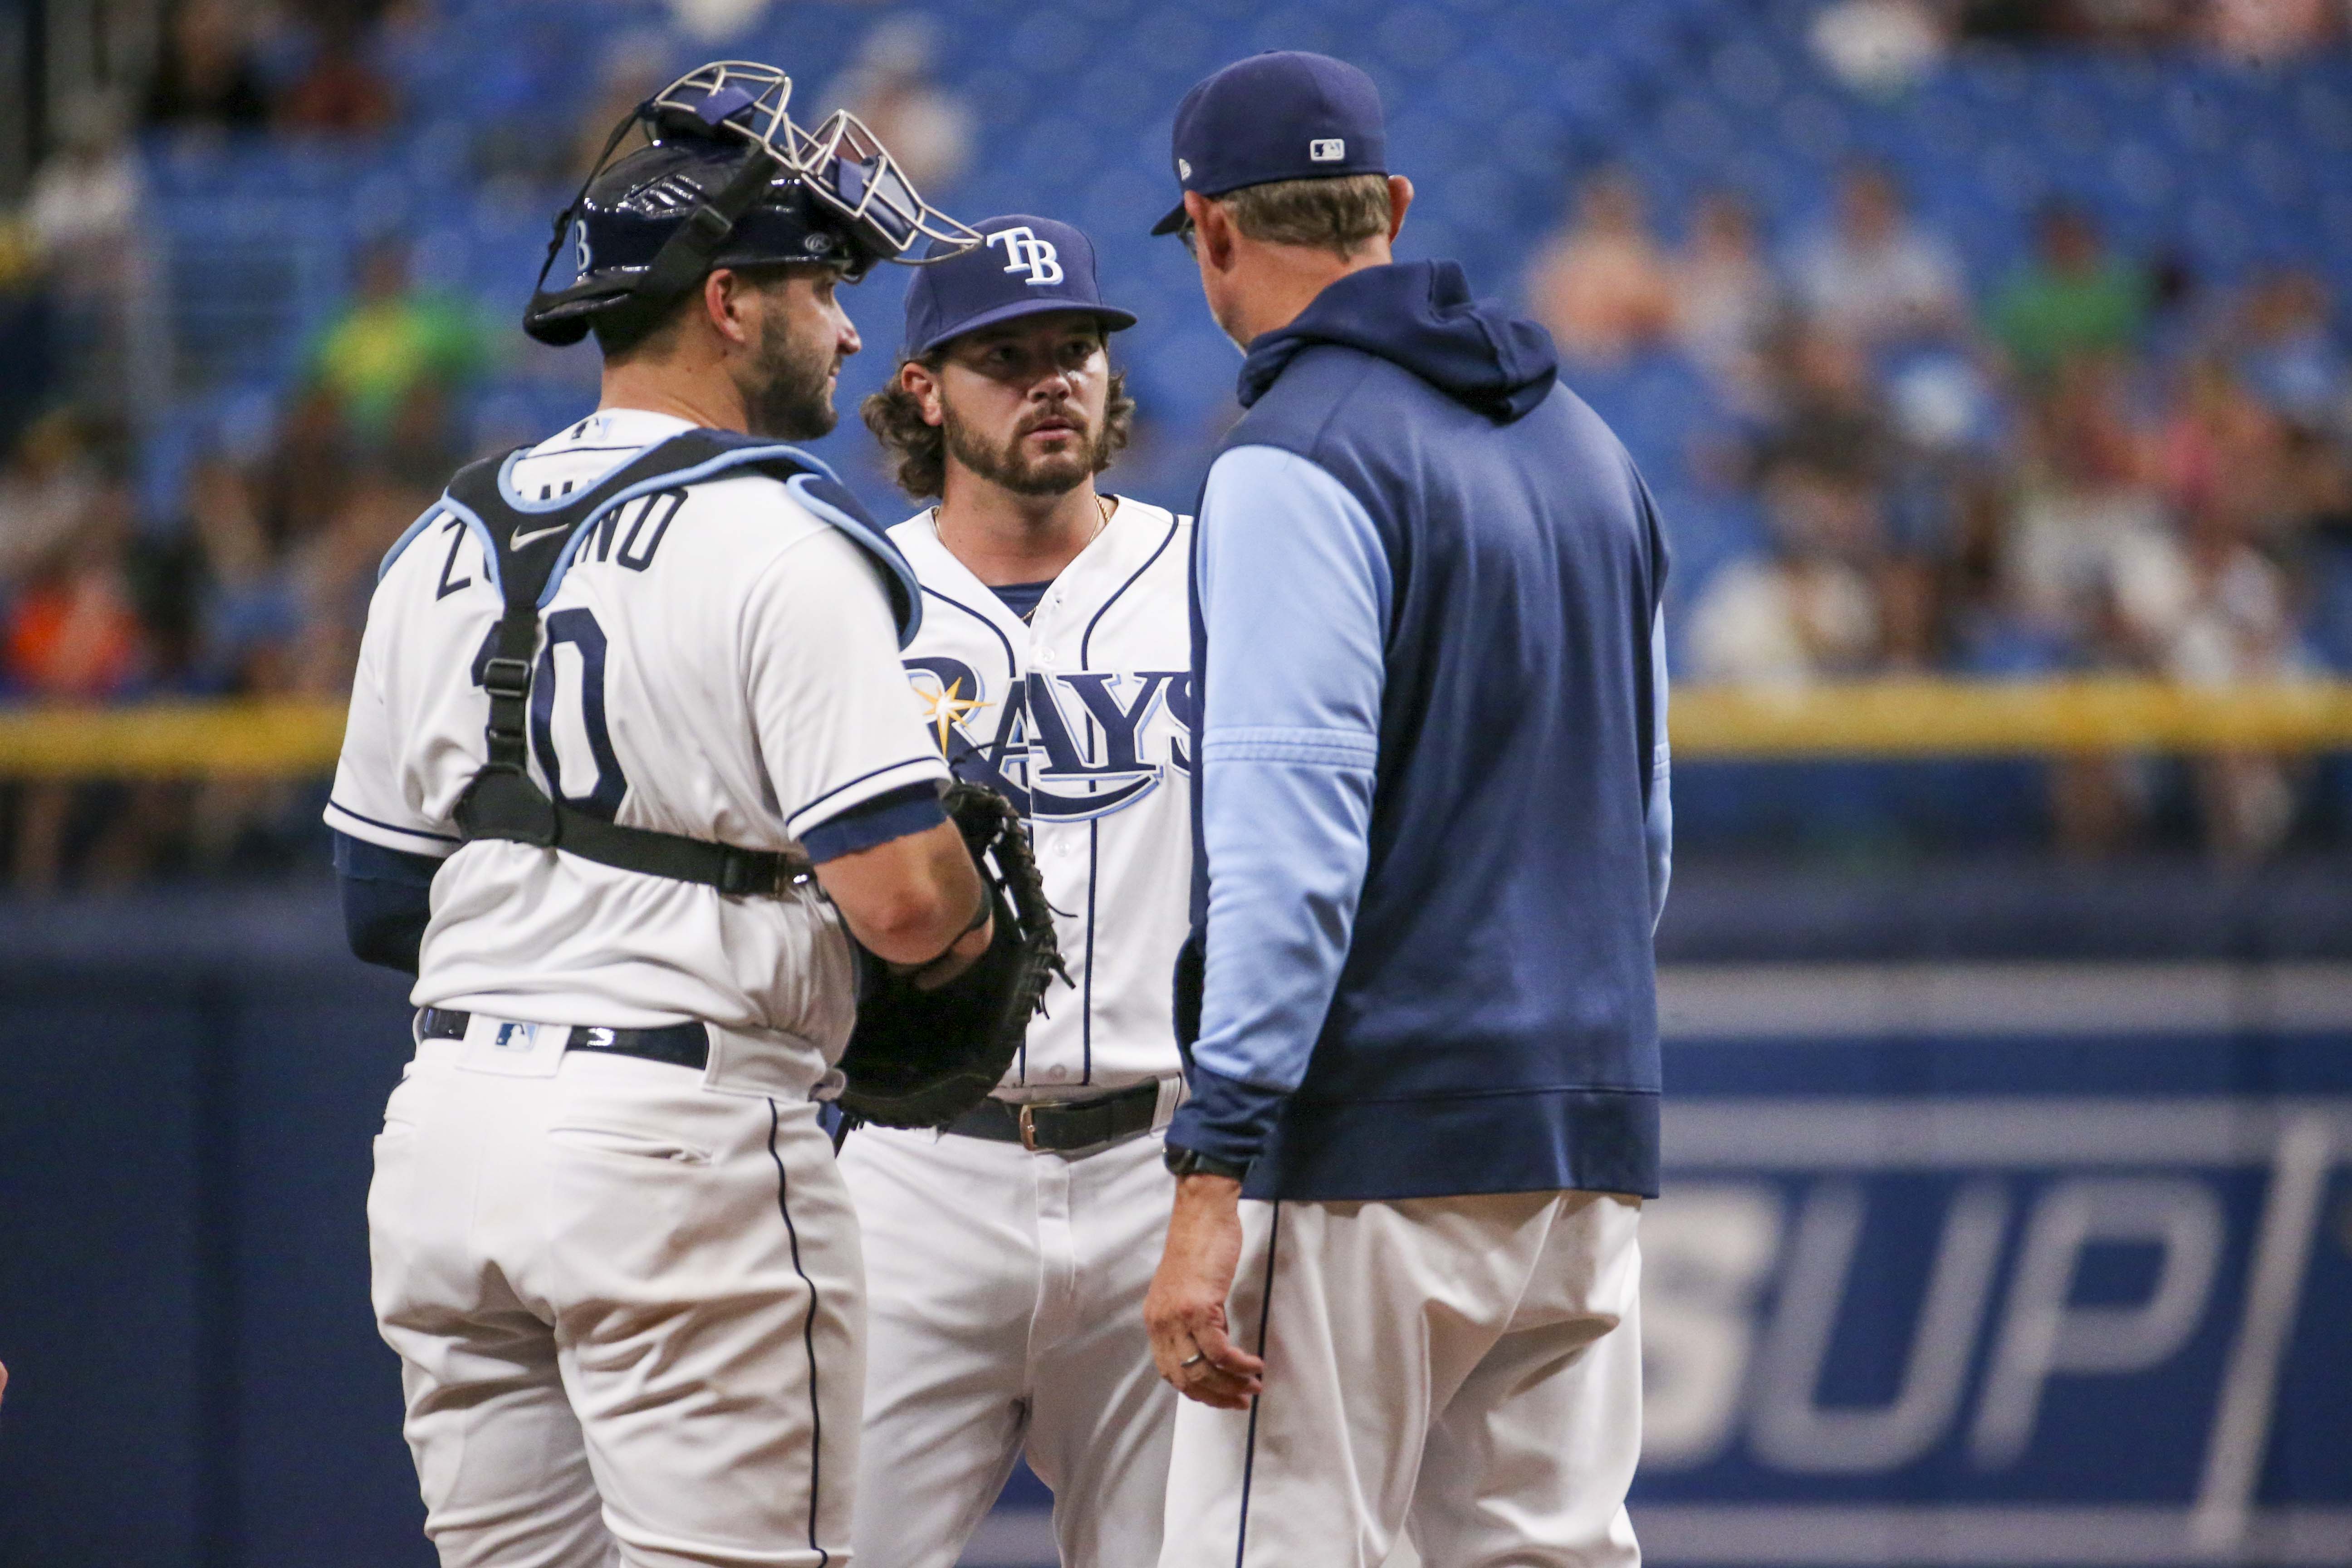 Ex-USF pitcher Phoenix Sanders makes MLB debut with Rays